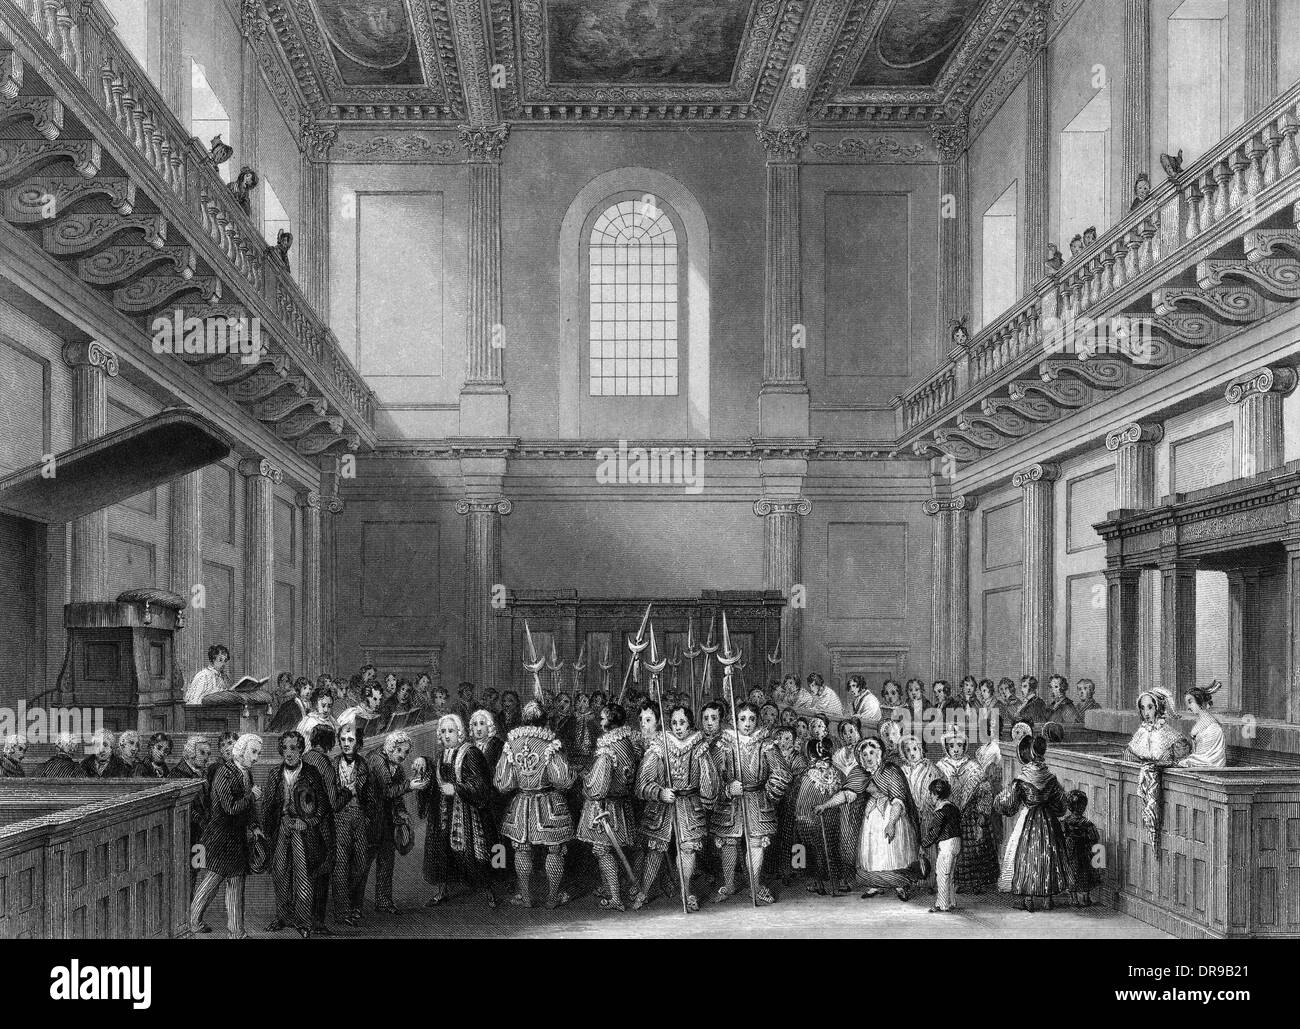 BANQUETING HOUSE Banque D'Images